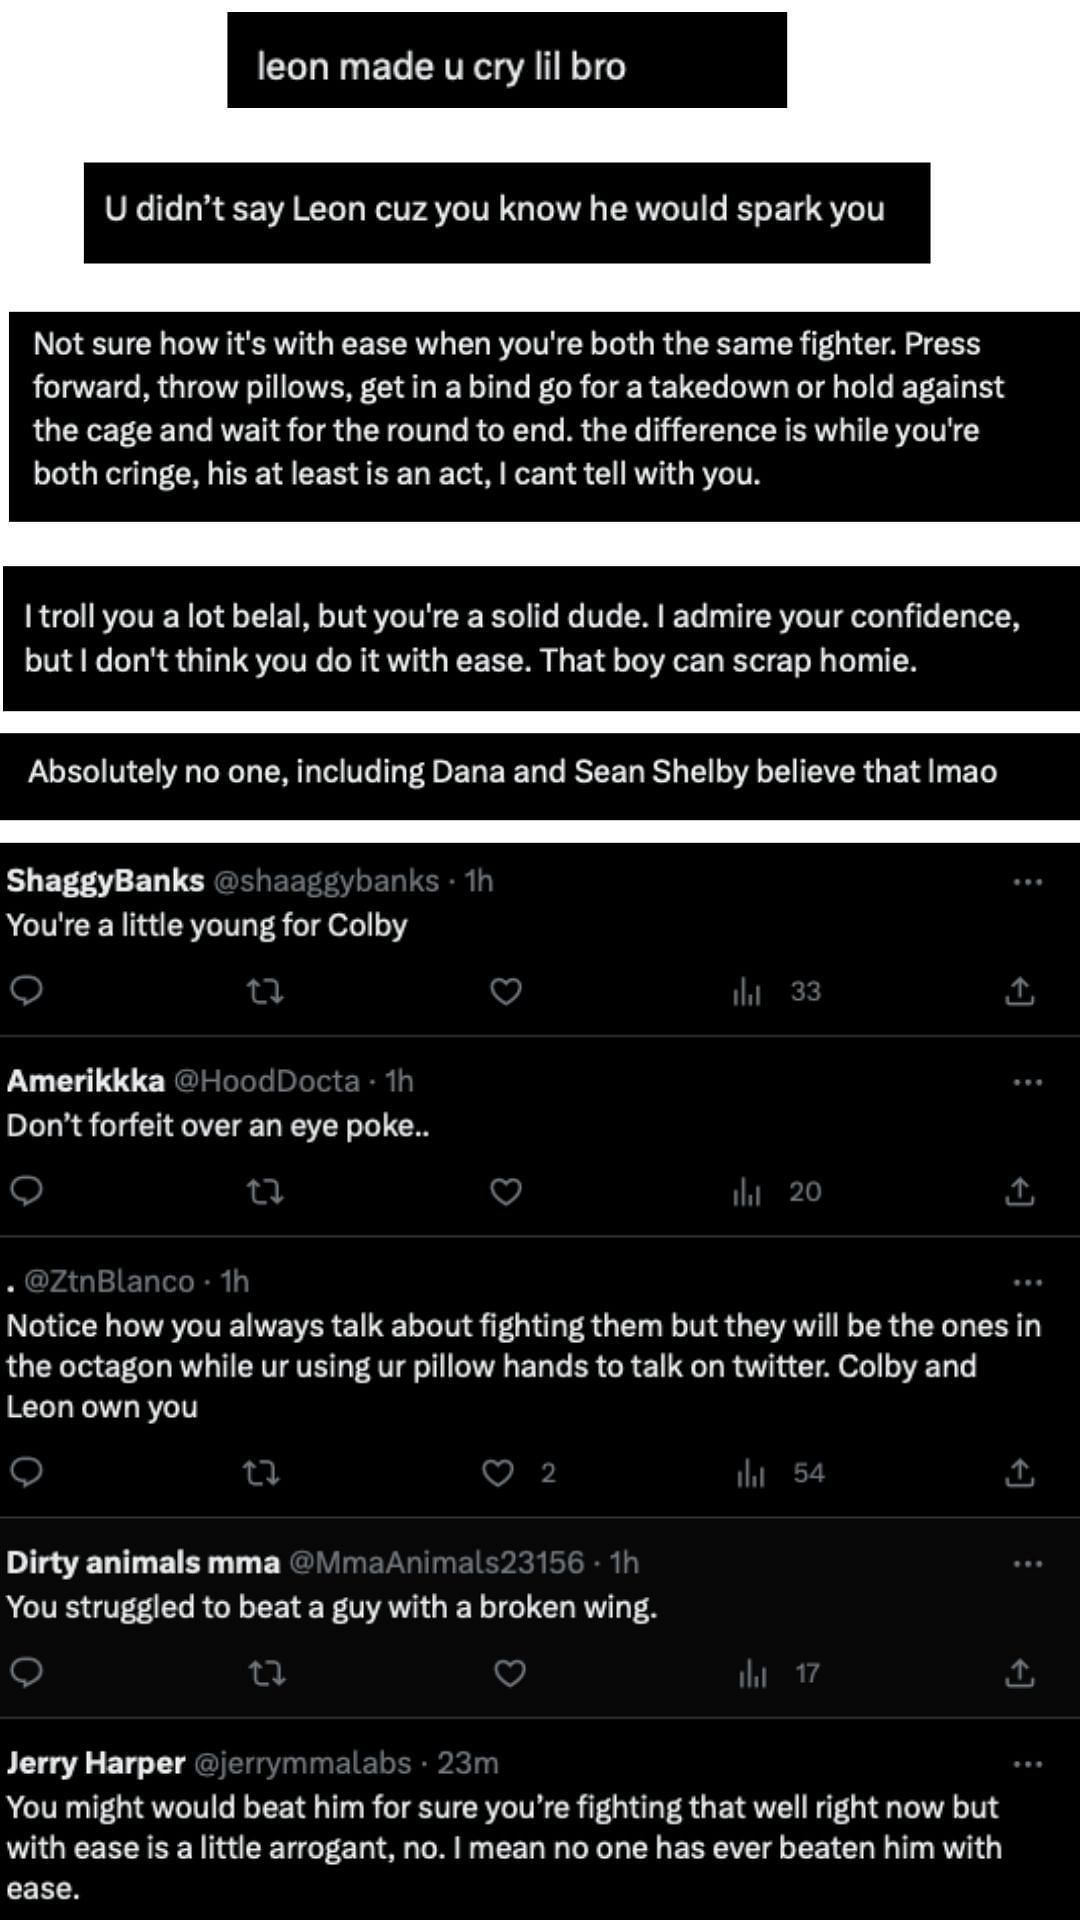 Colby goes off Belal Muhammad for the “white” tweet and threatens